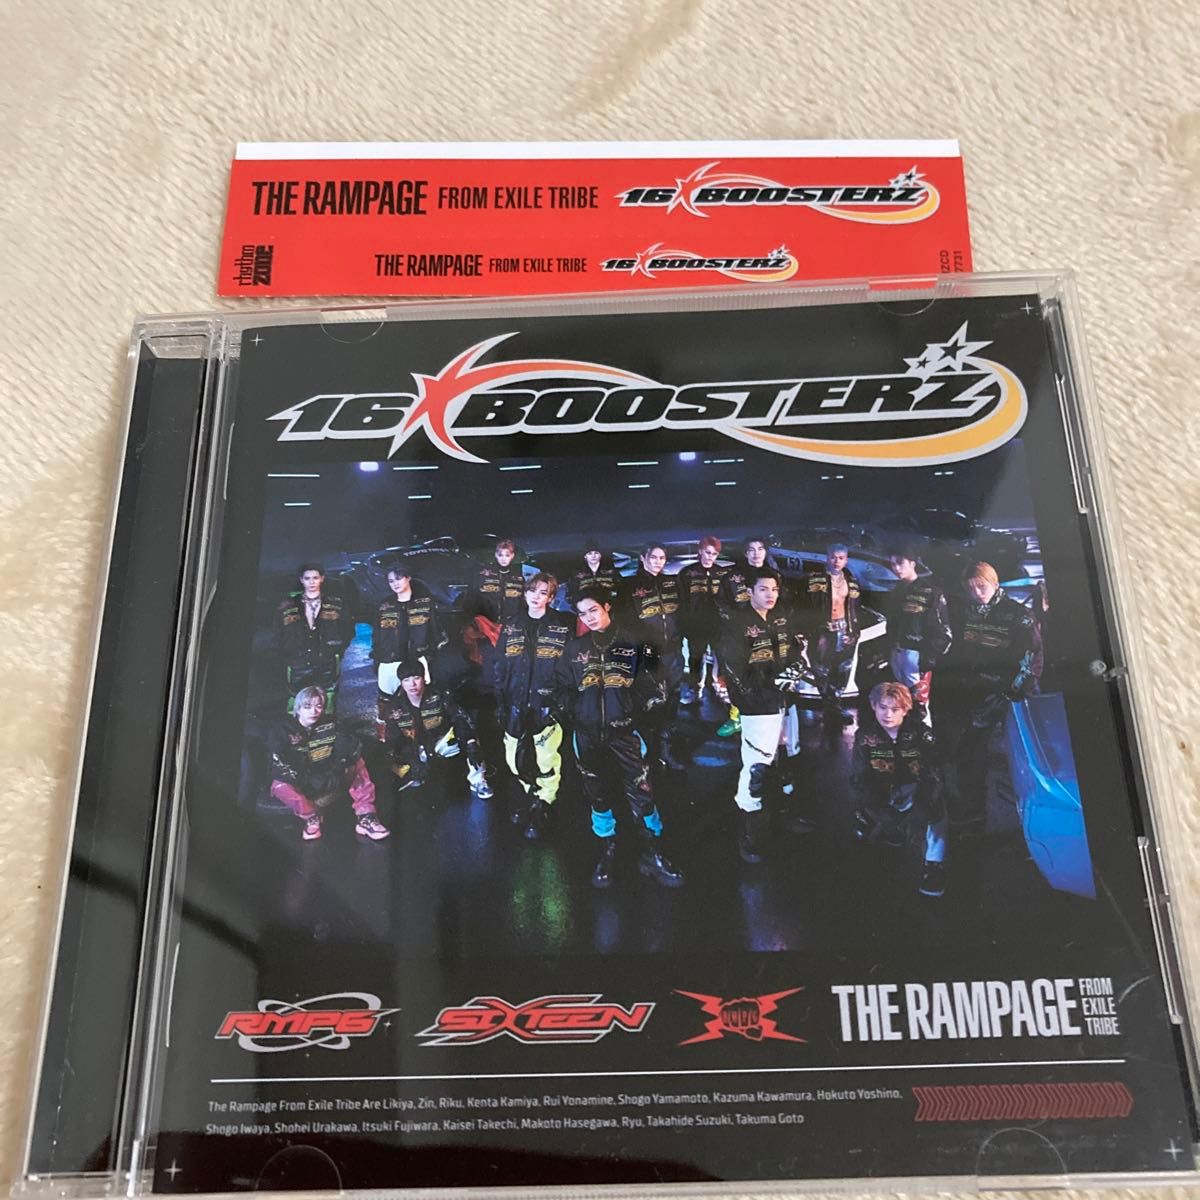 THE RAMPAGE from EXILE TRIBE CD/16BOOSTERZ 23/5/2発売 【オリコン加盟店】 ＄＃